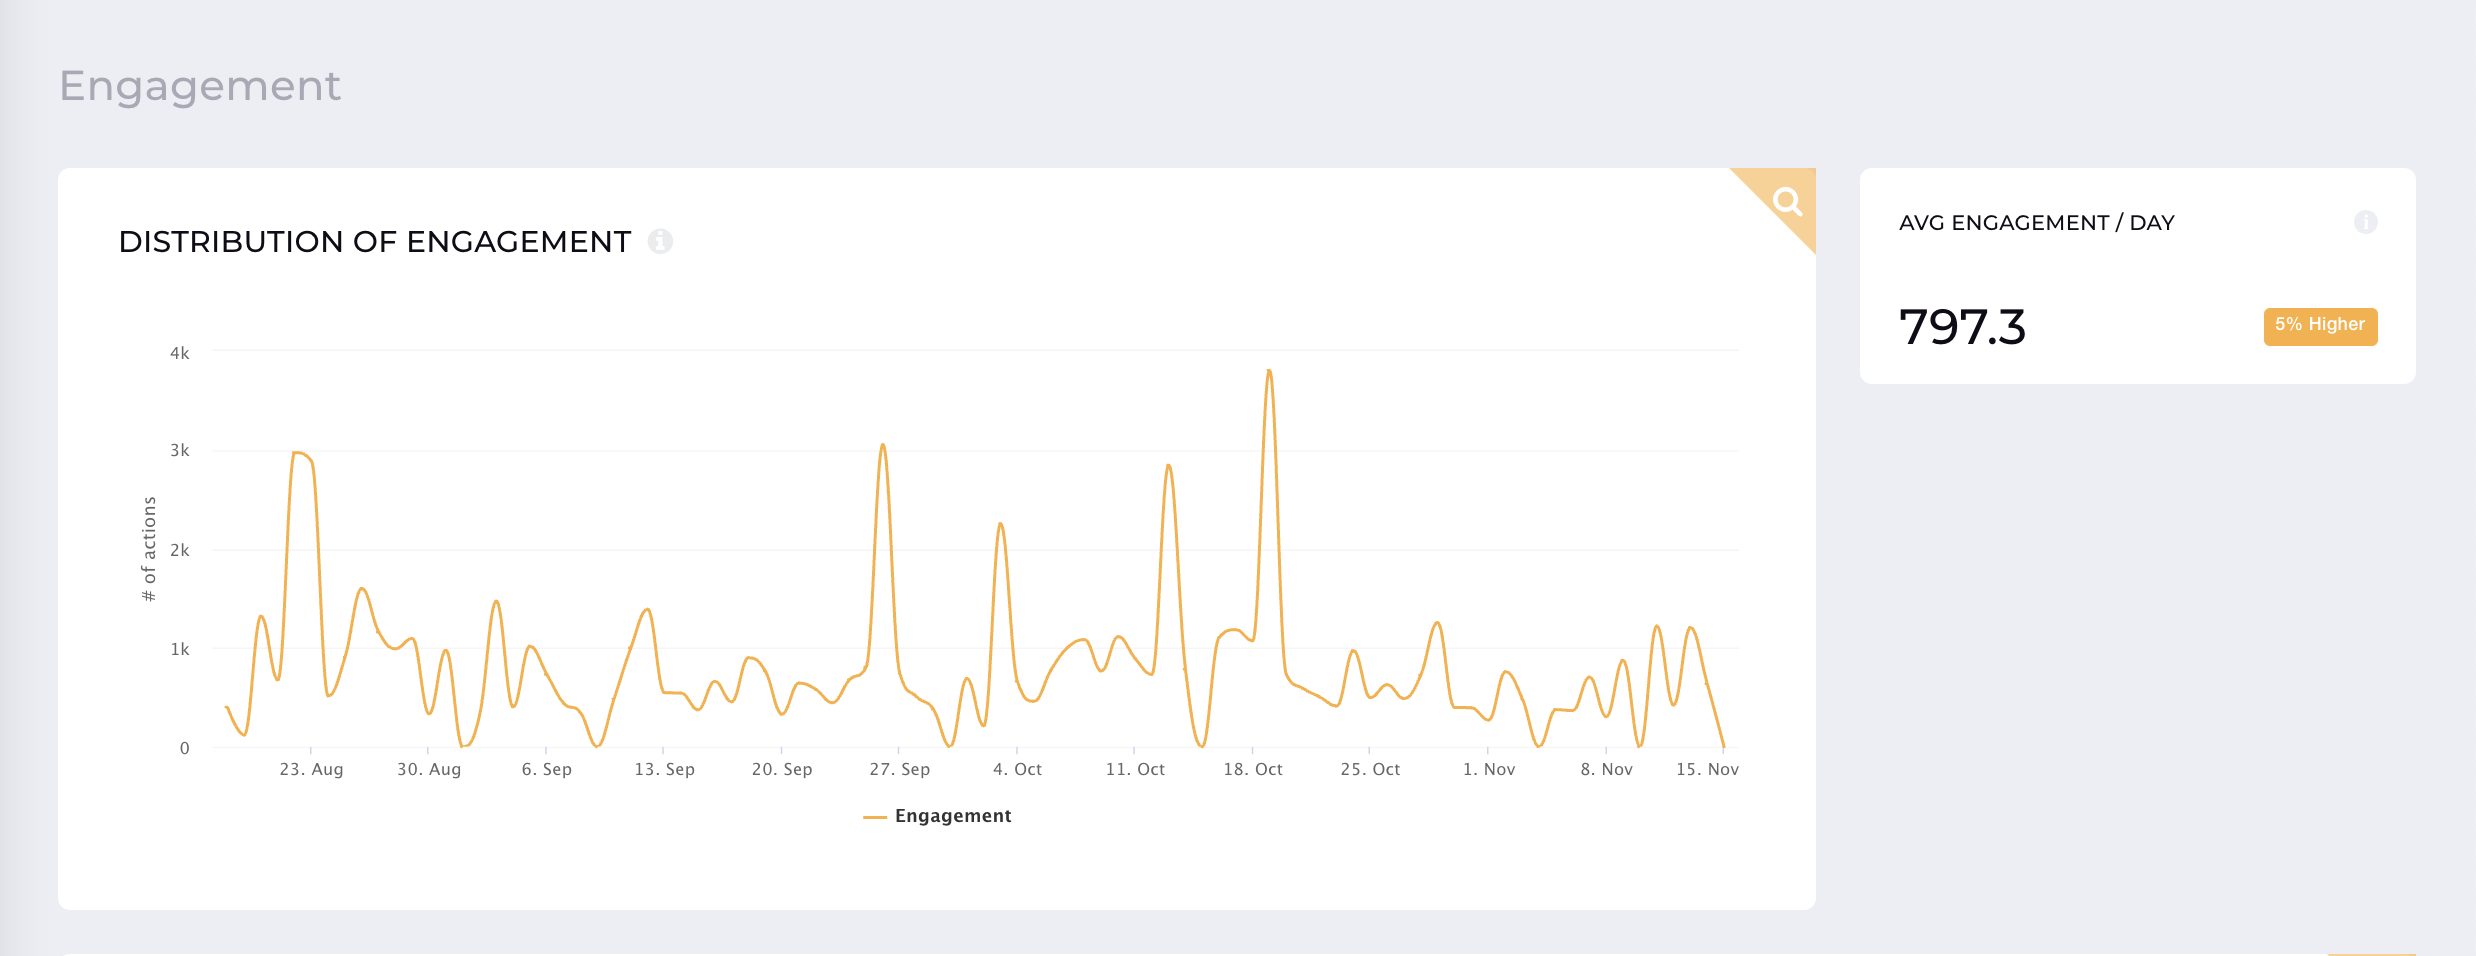 Here is an example of what data you can get from analytics to improve your social media engagement.